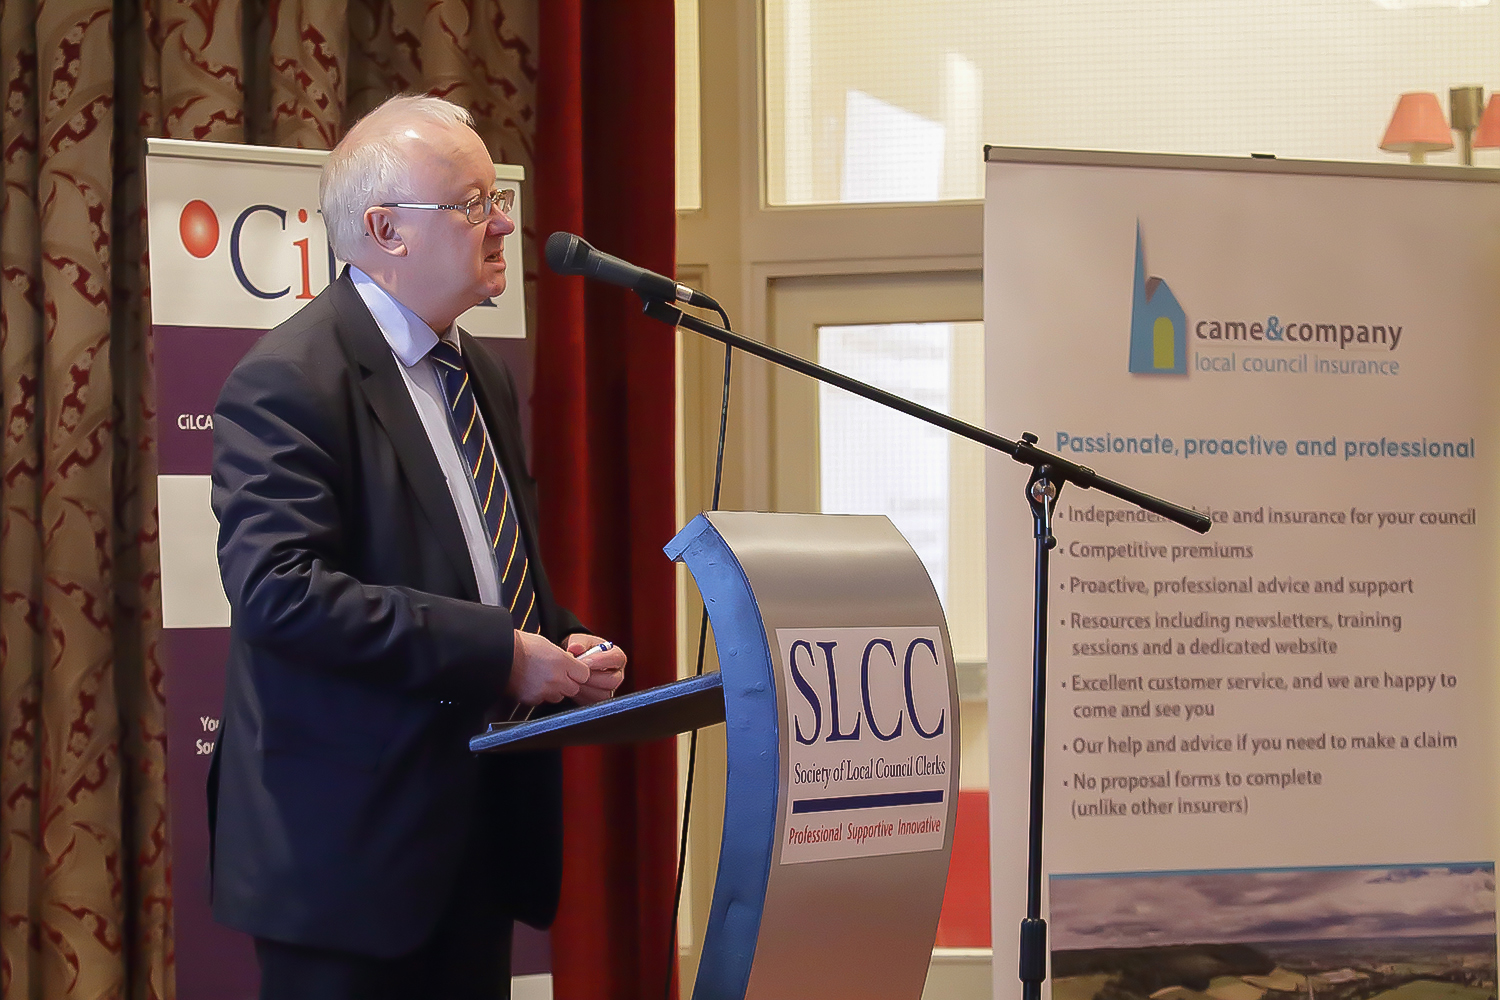 Coverage of Society of Local Council Clerks annual conference at Hotel Metrople